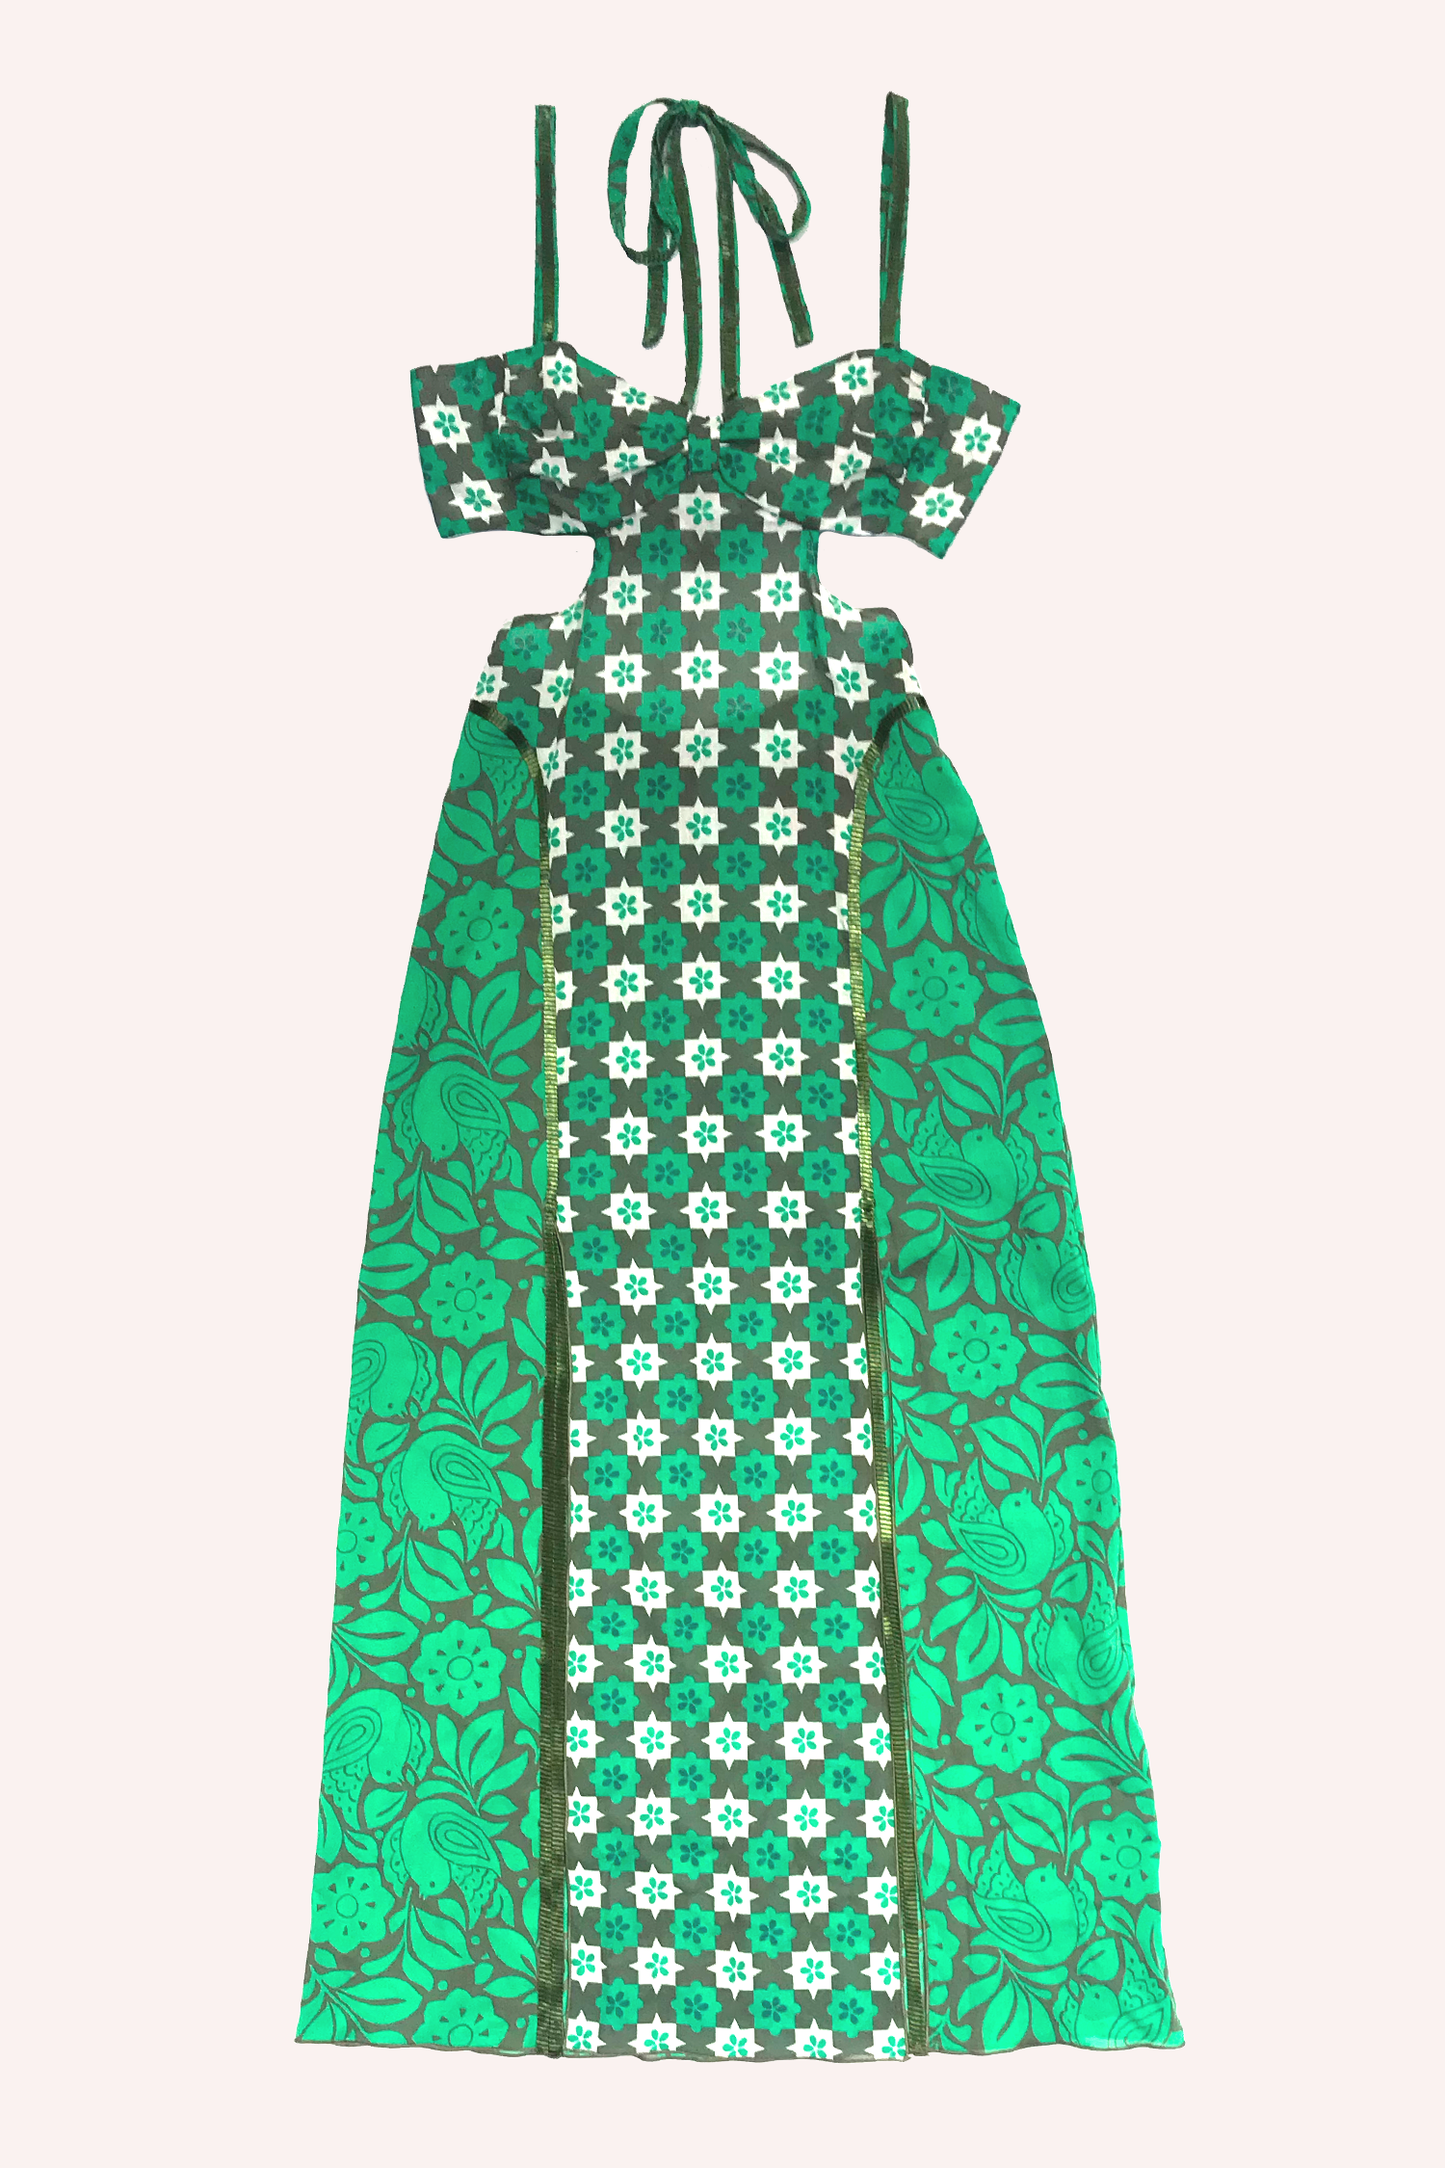 Detail of the floral pattern features a green and white star-shaped pattern, hems in darker green